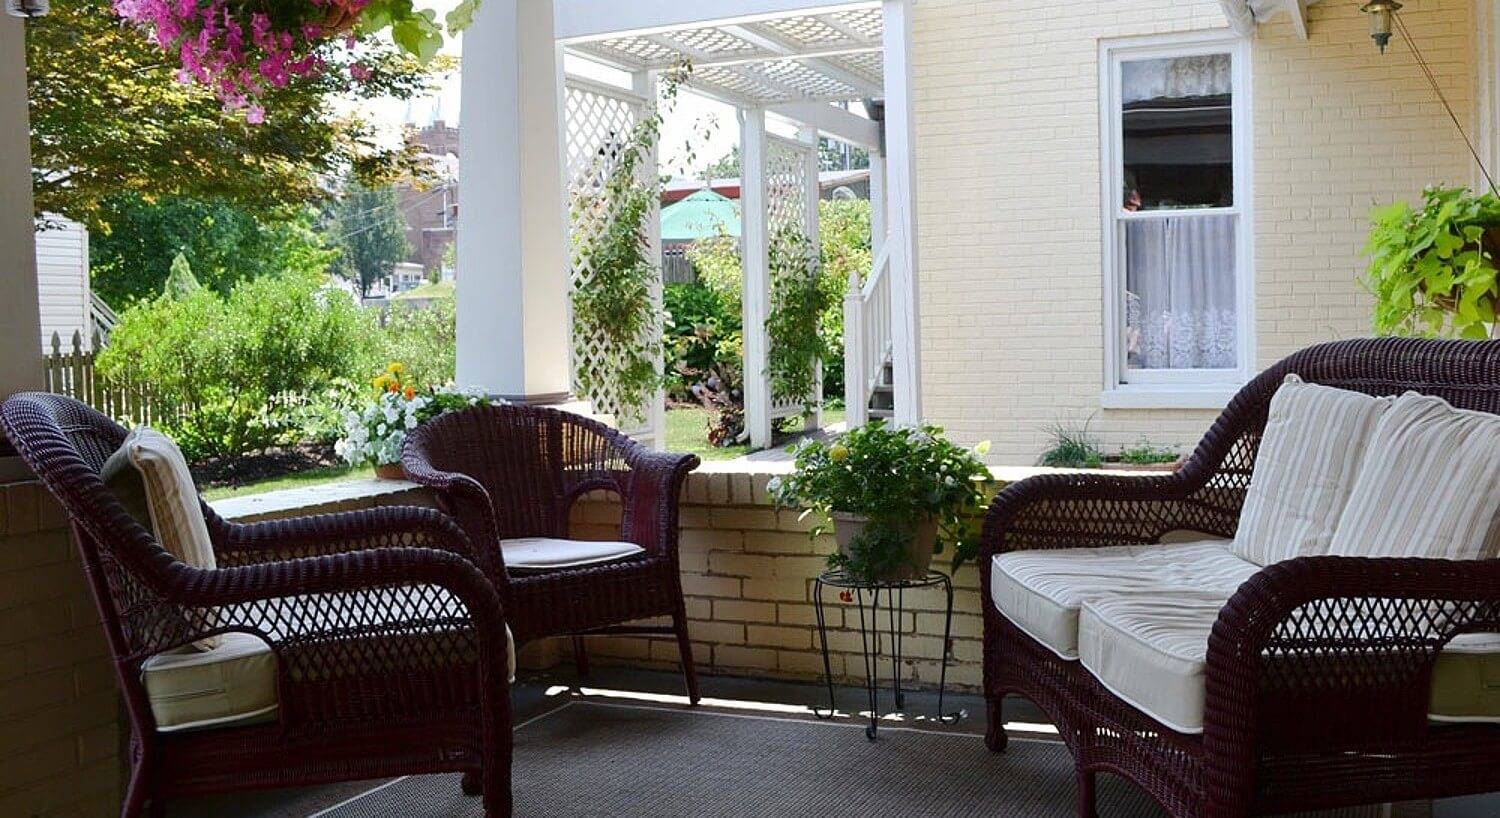 Outdoor patio with brown wicker furniture, white columns and plants